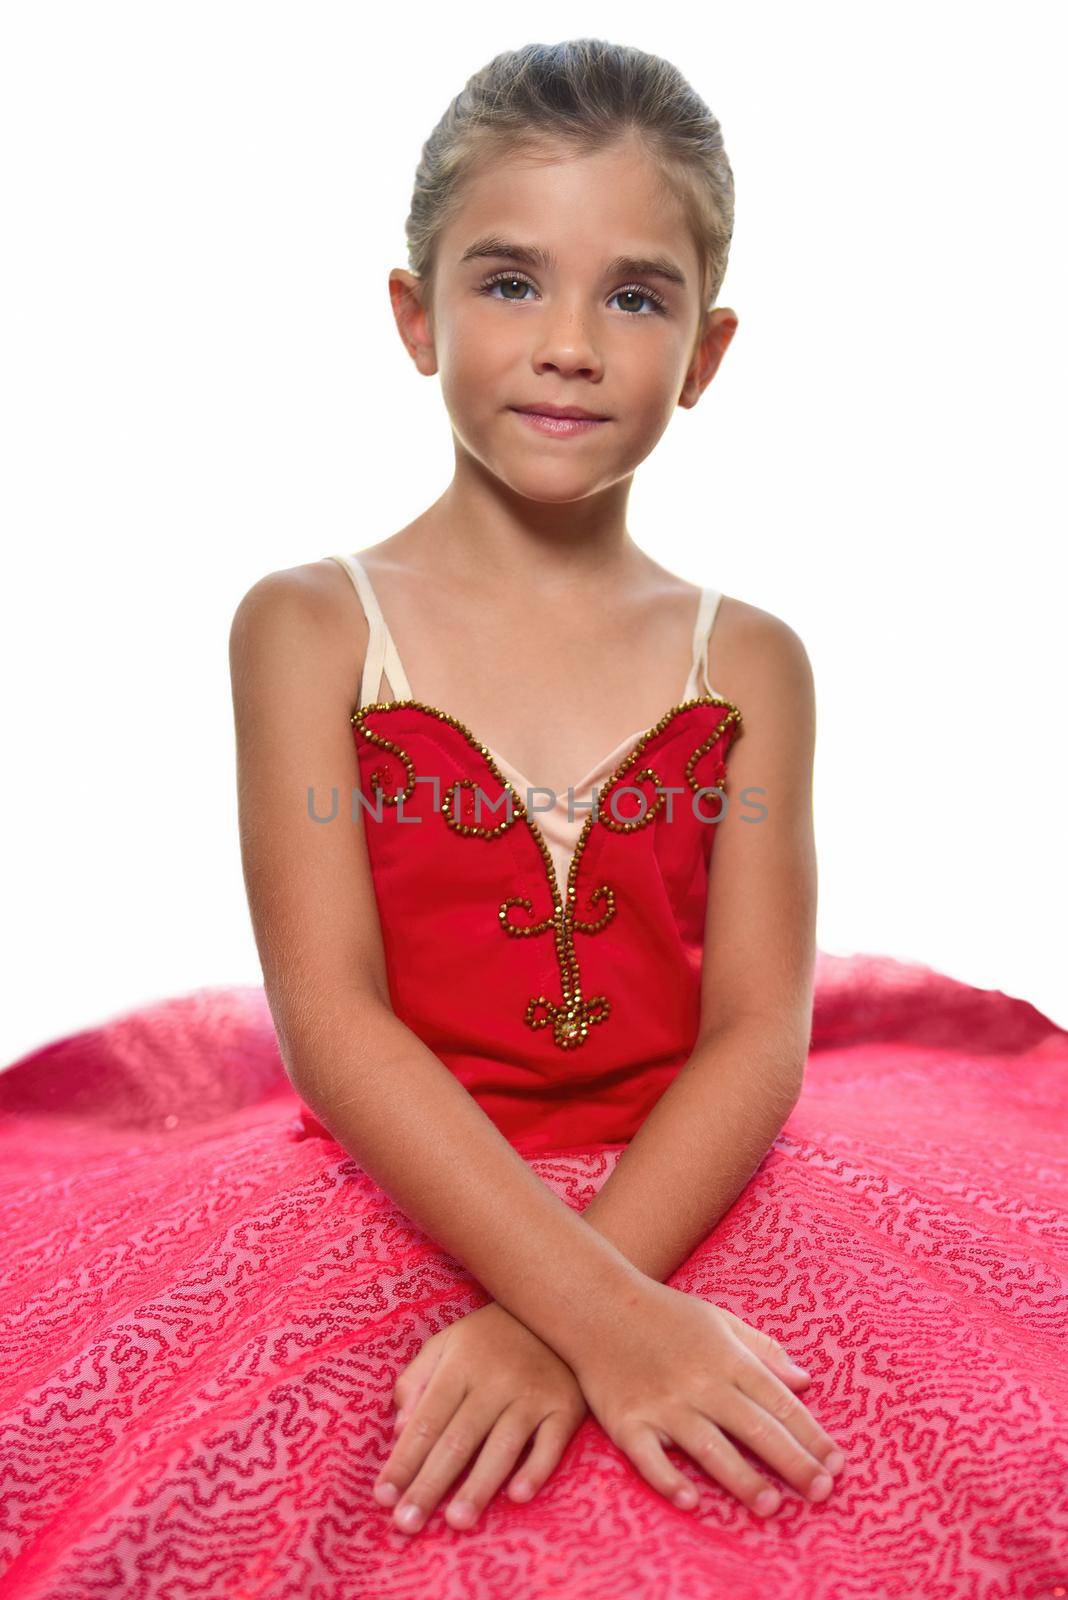 portrait of a beautiful little ballerina in a performance red dress dreaming to become professional ballet dancer by Nickstock